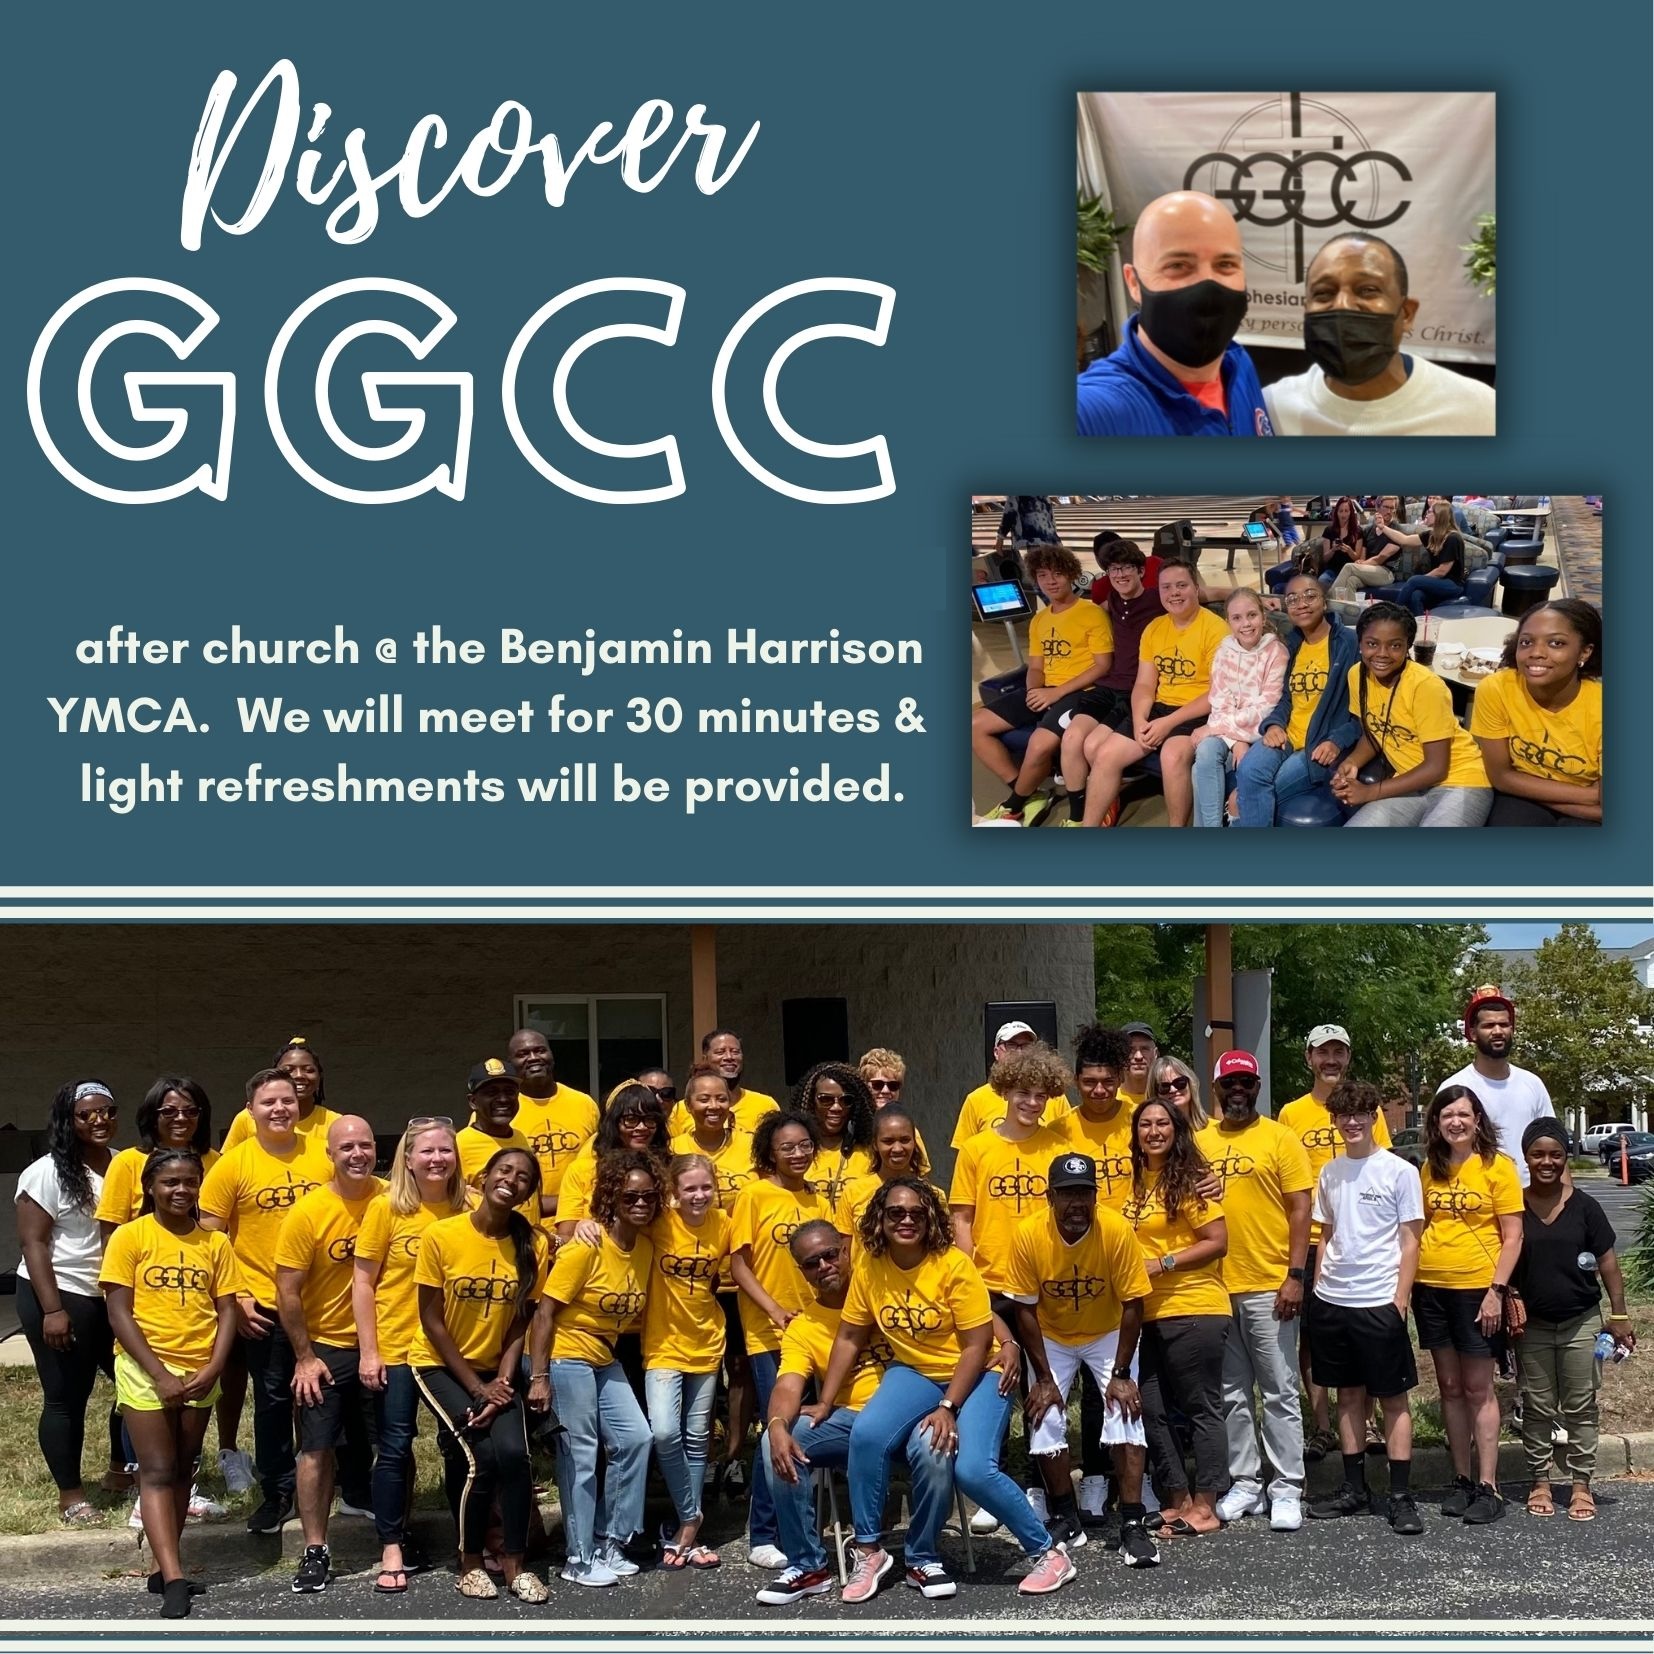 Discover GGCC after church